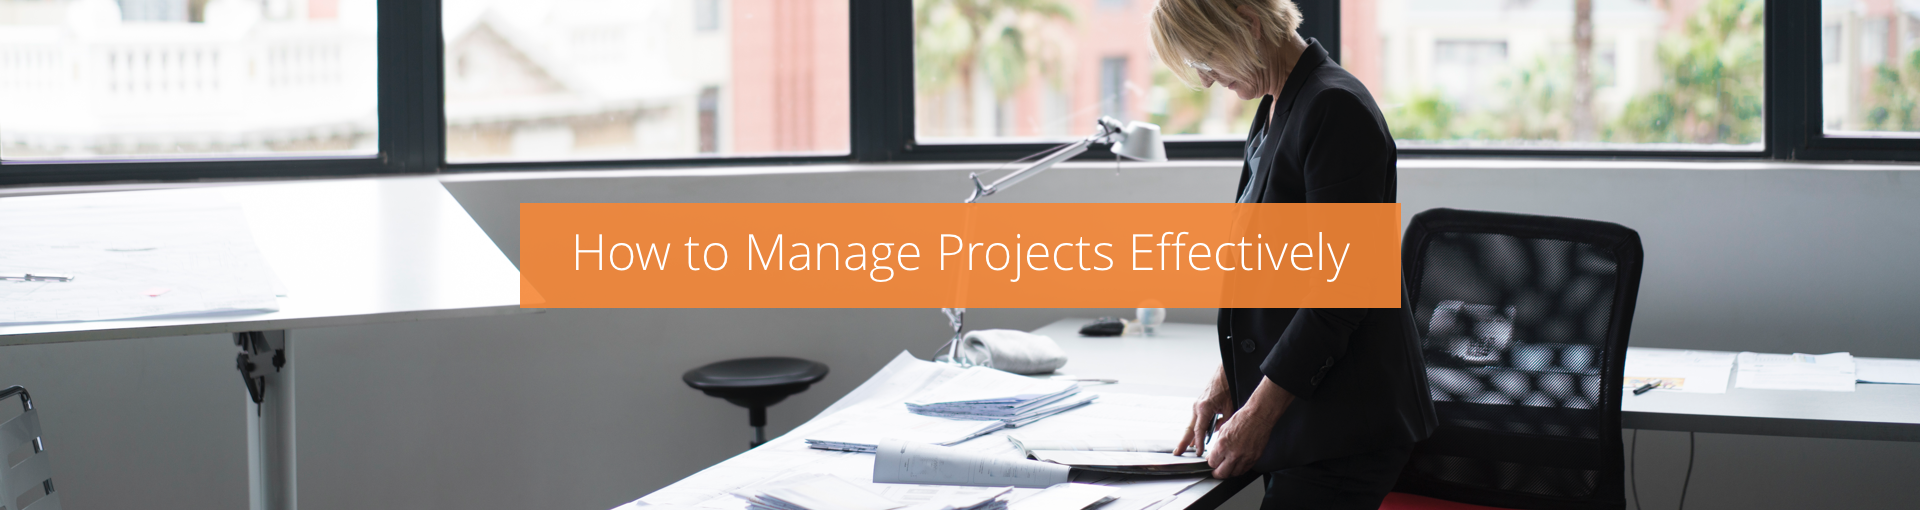 How to Manage Projects Effectively Featured Image